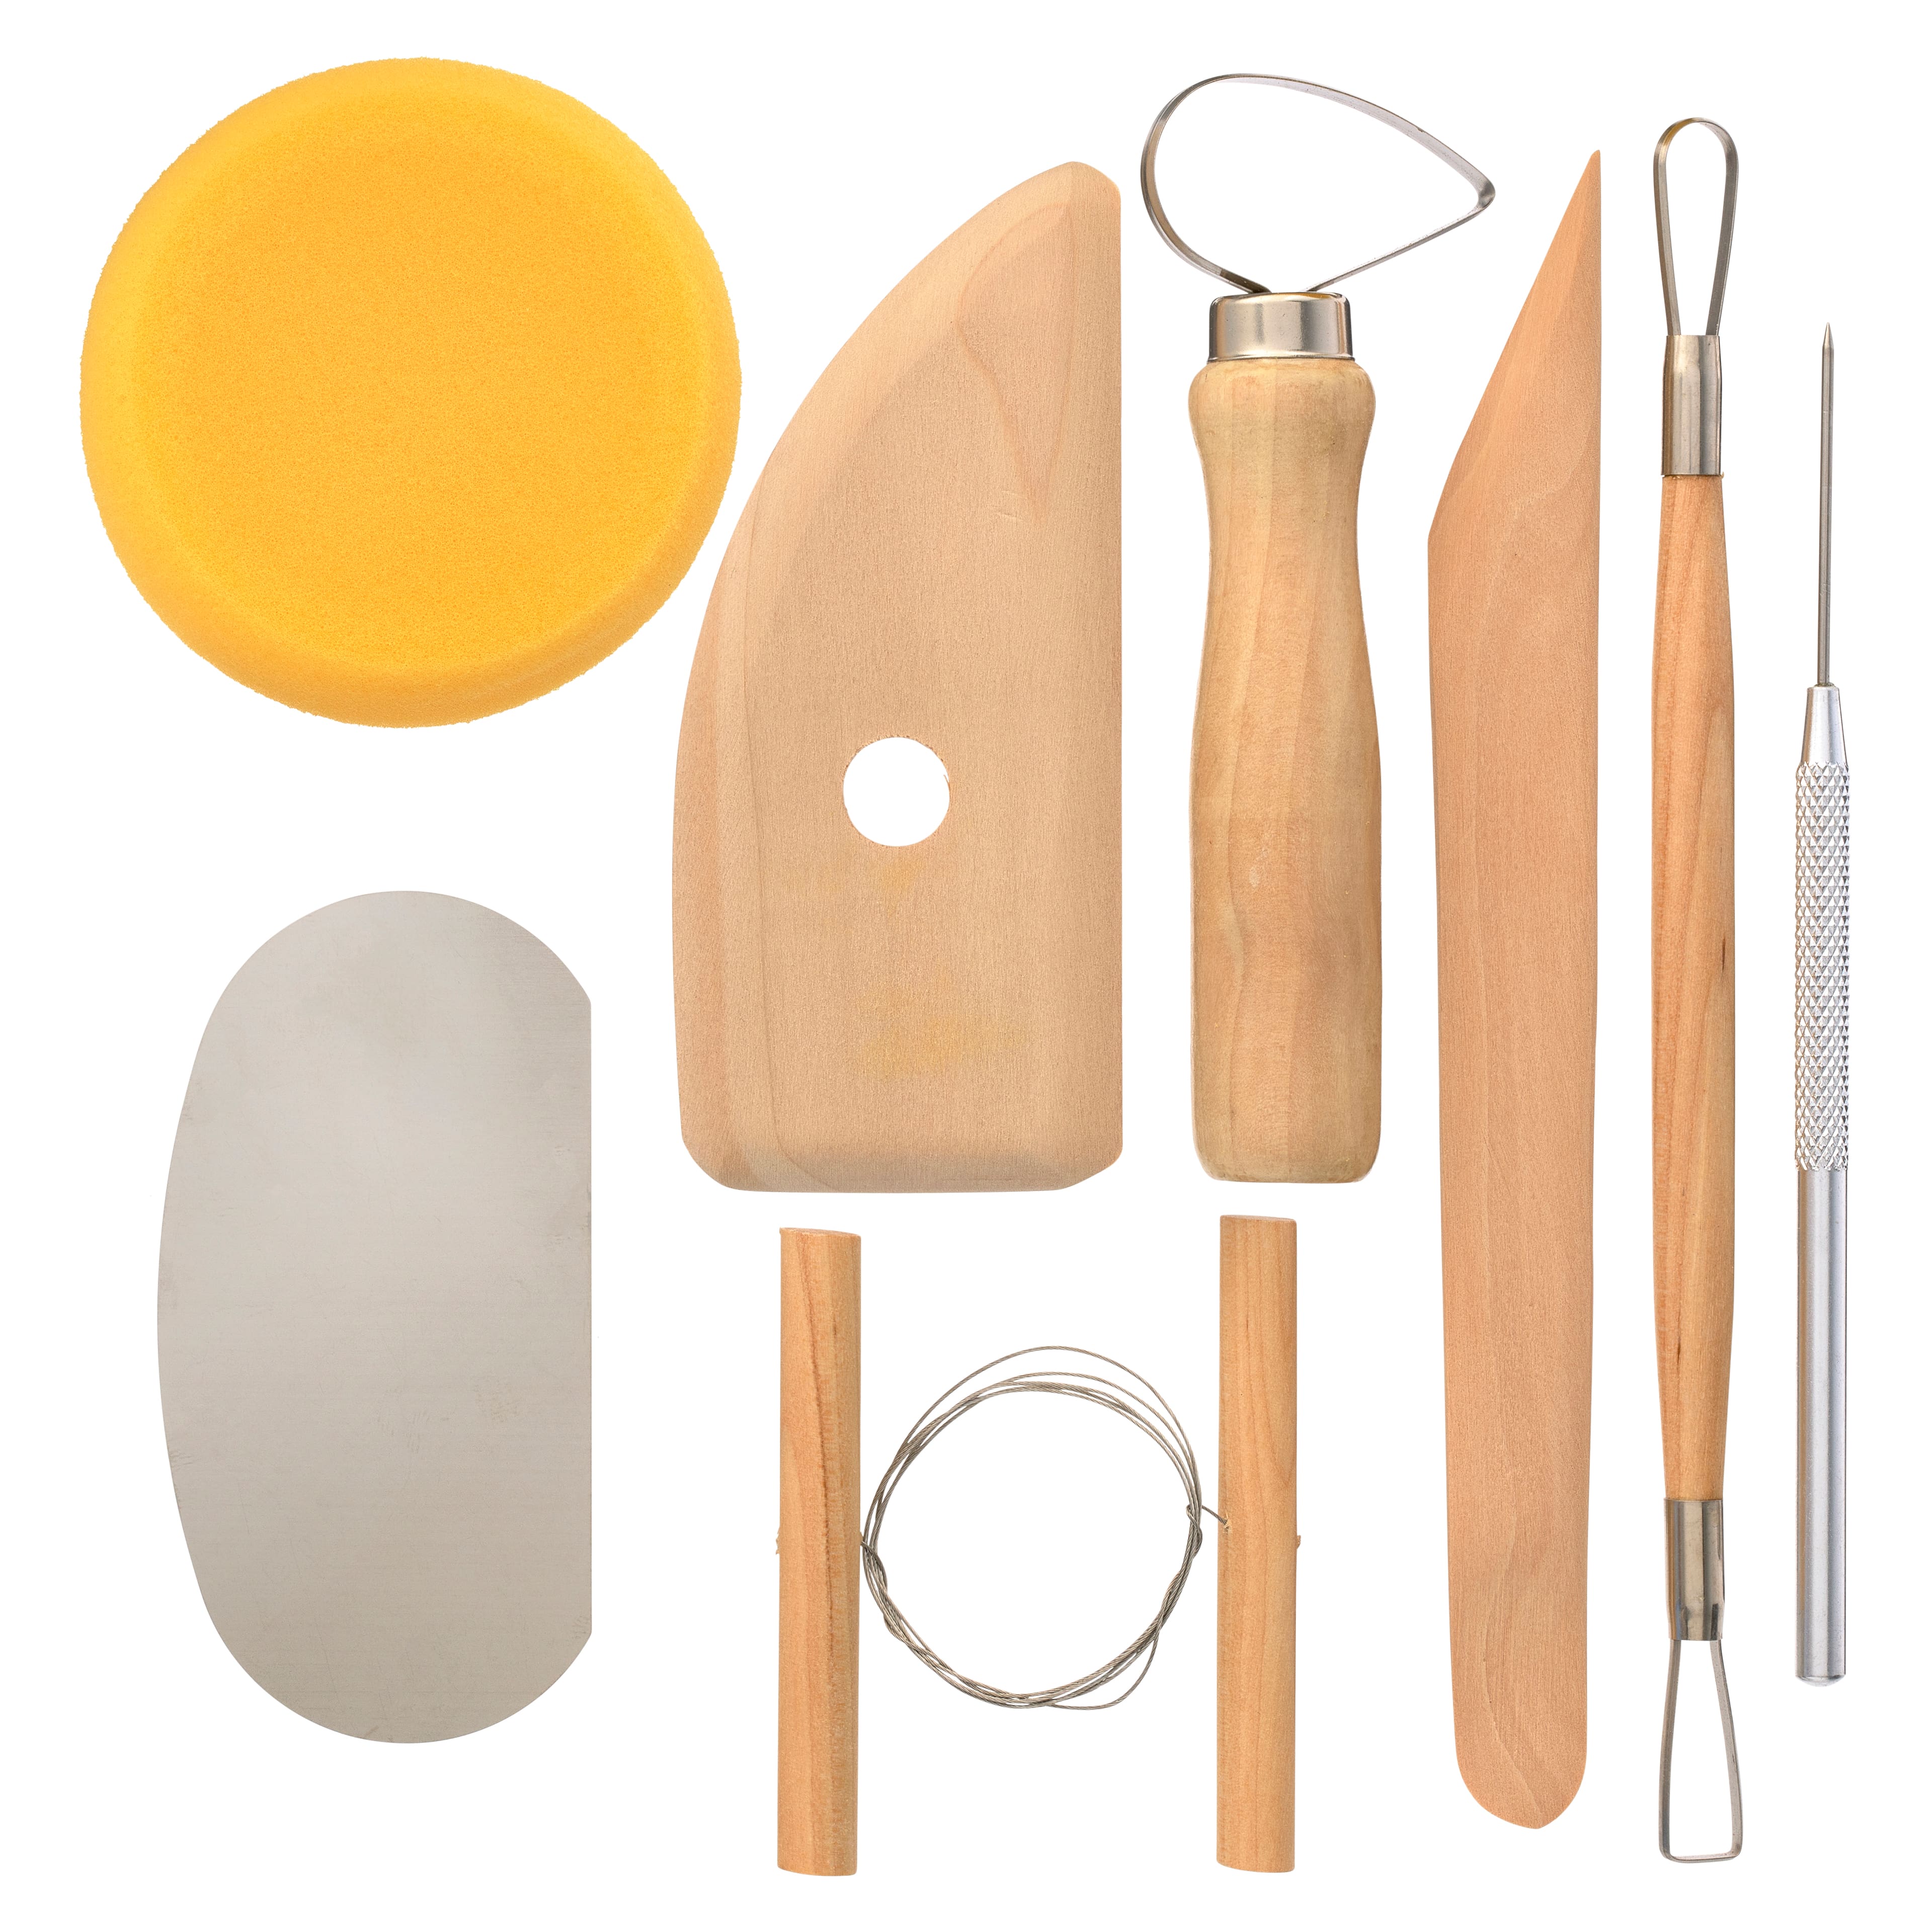 Clay Shaper Set #2 By Craft Smart®